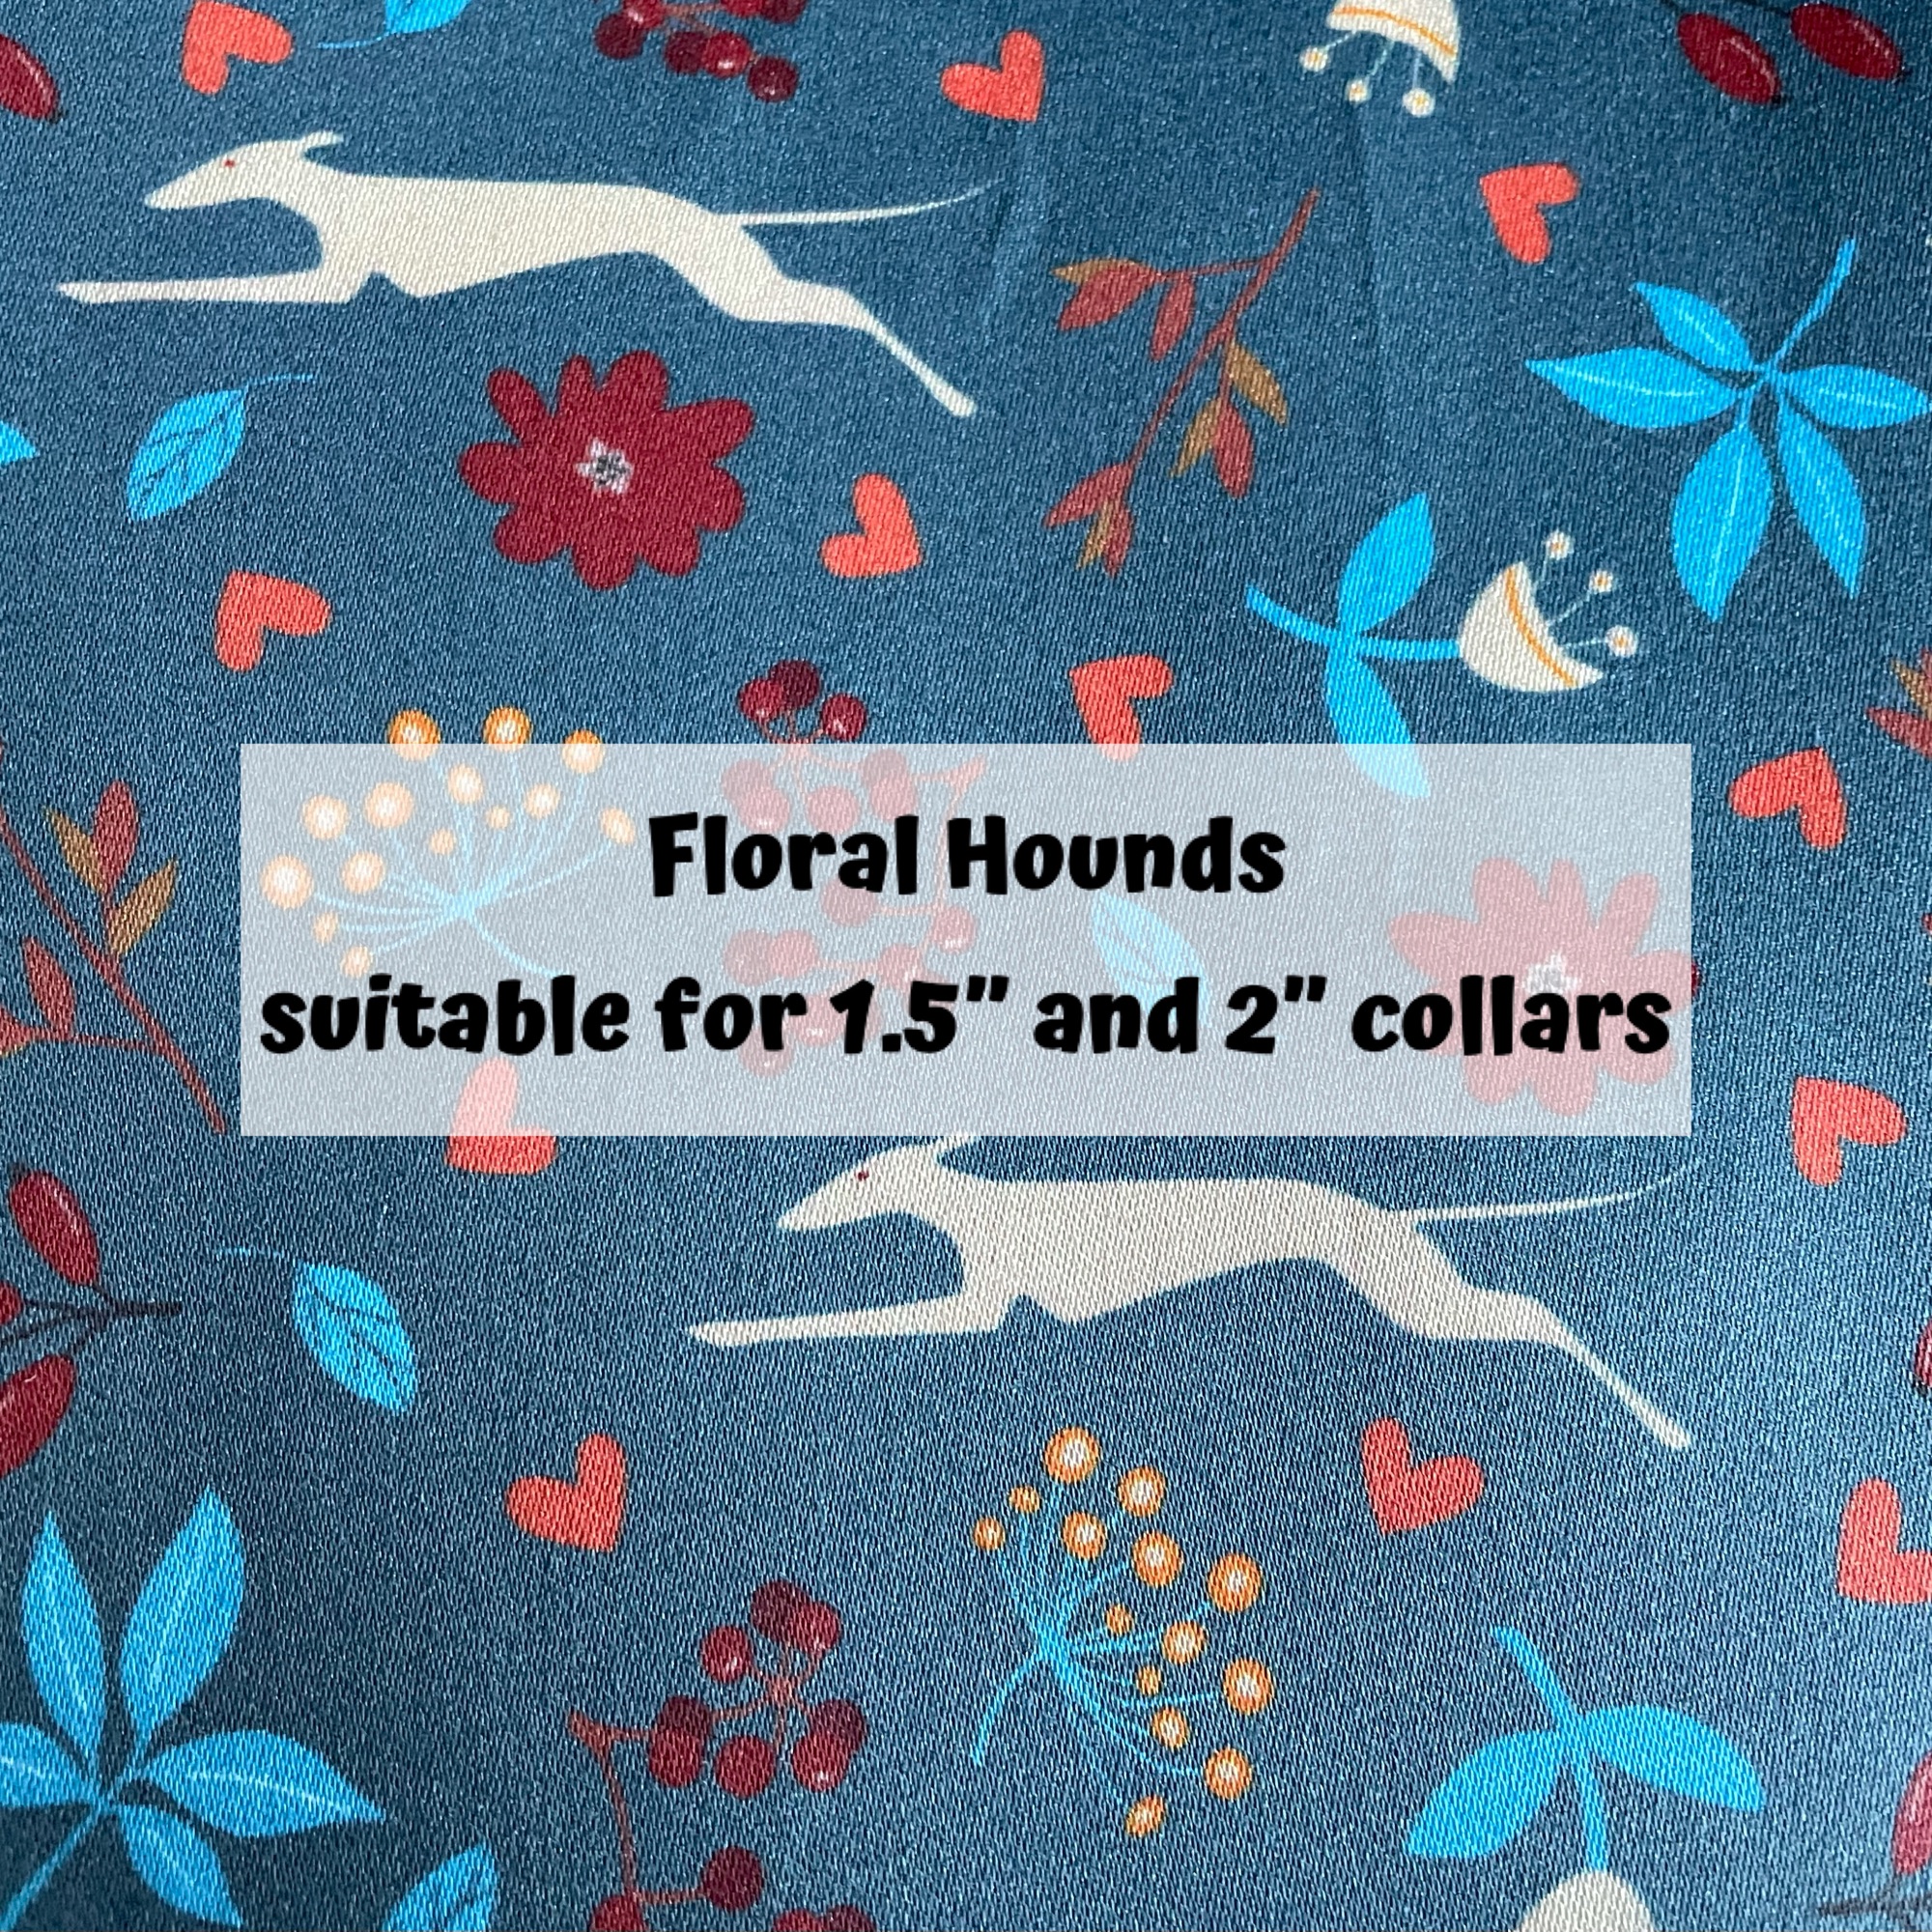 Floral Hounds